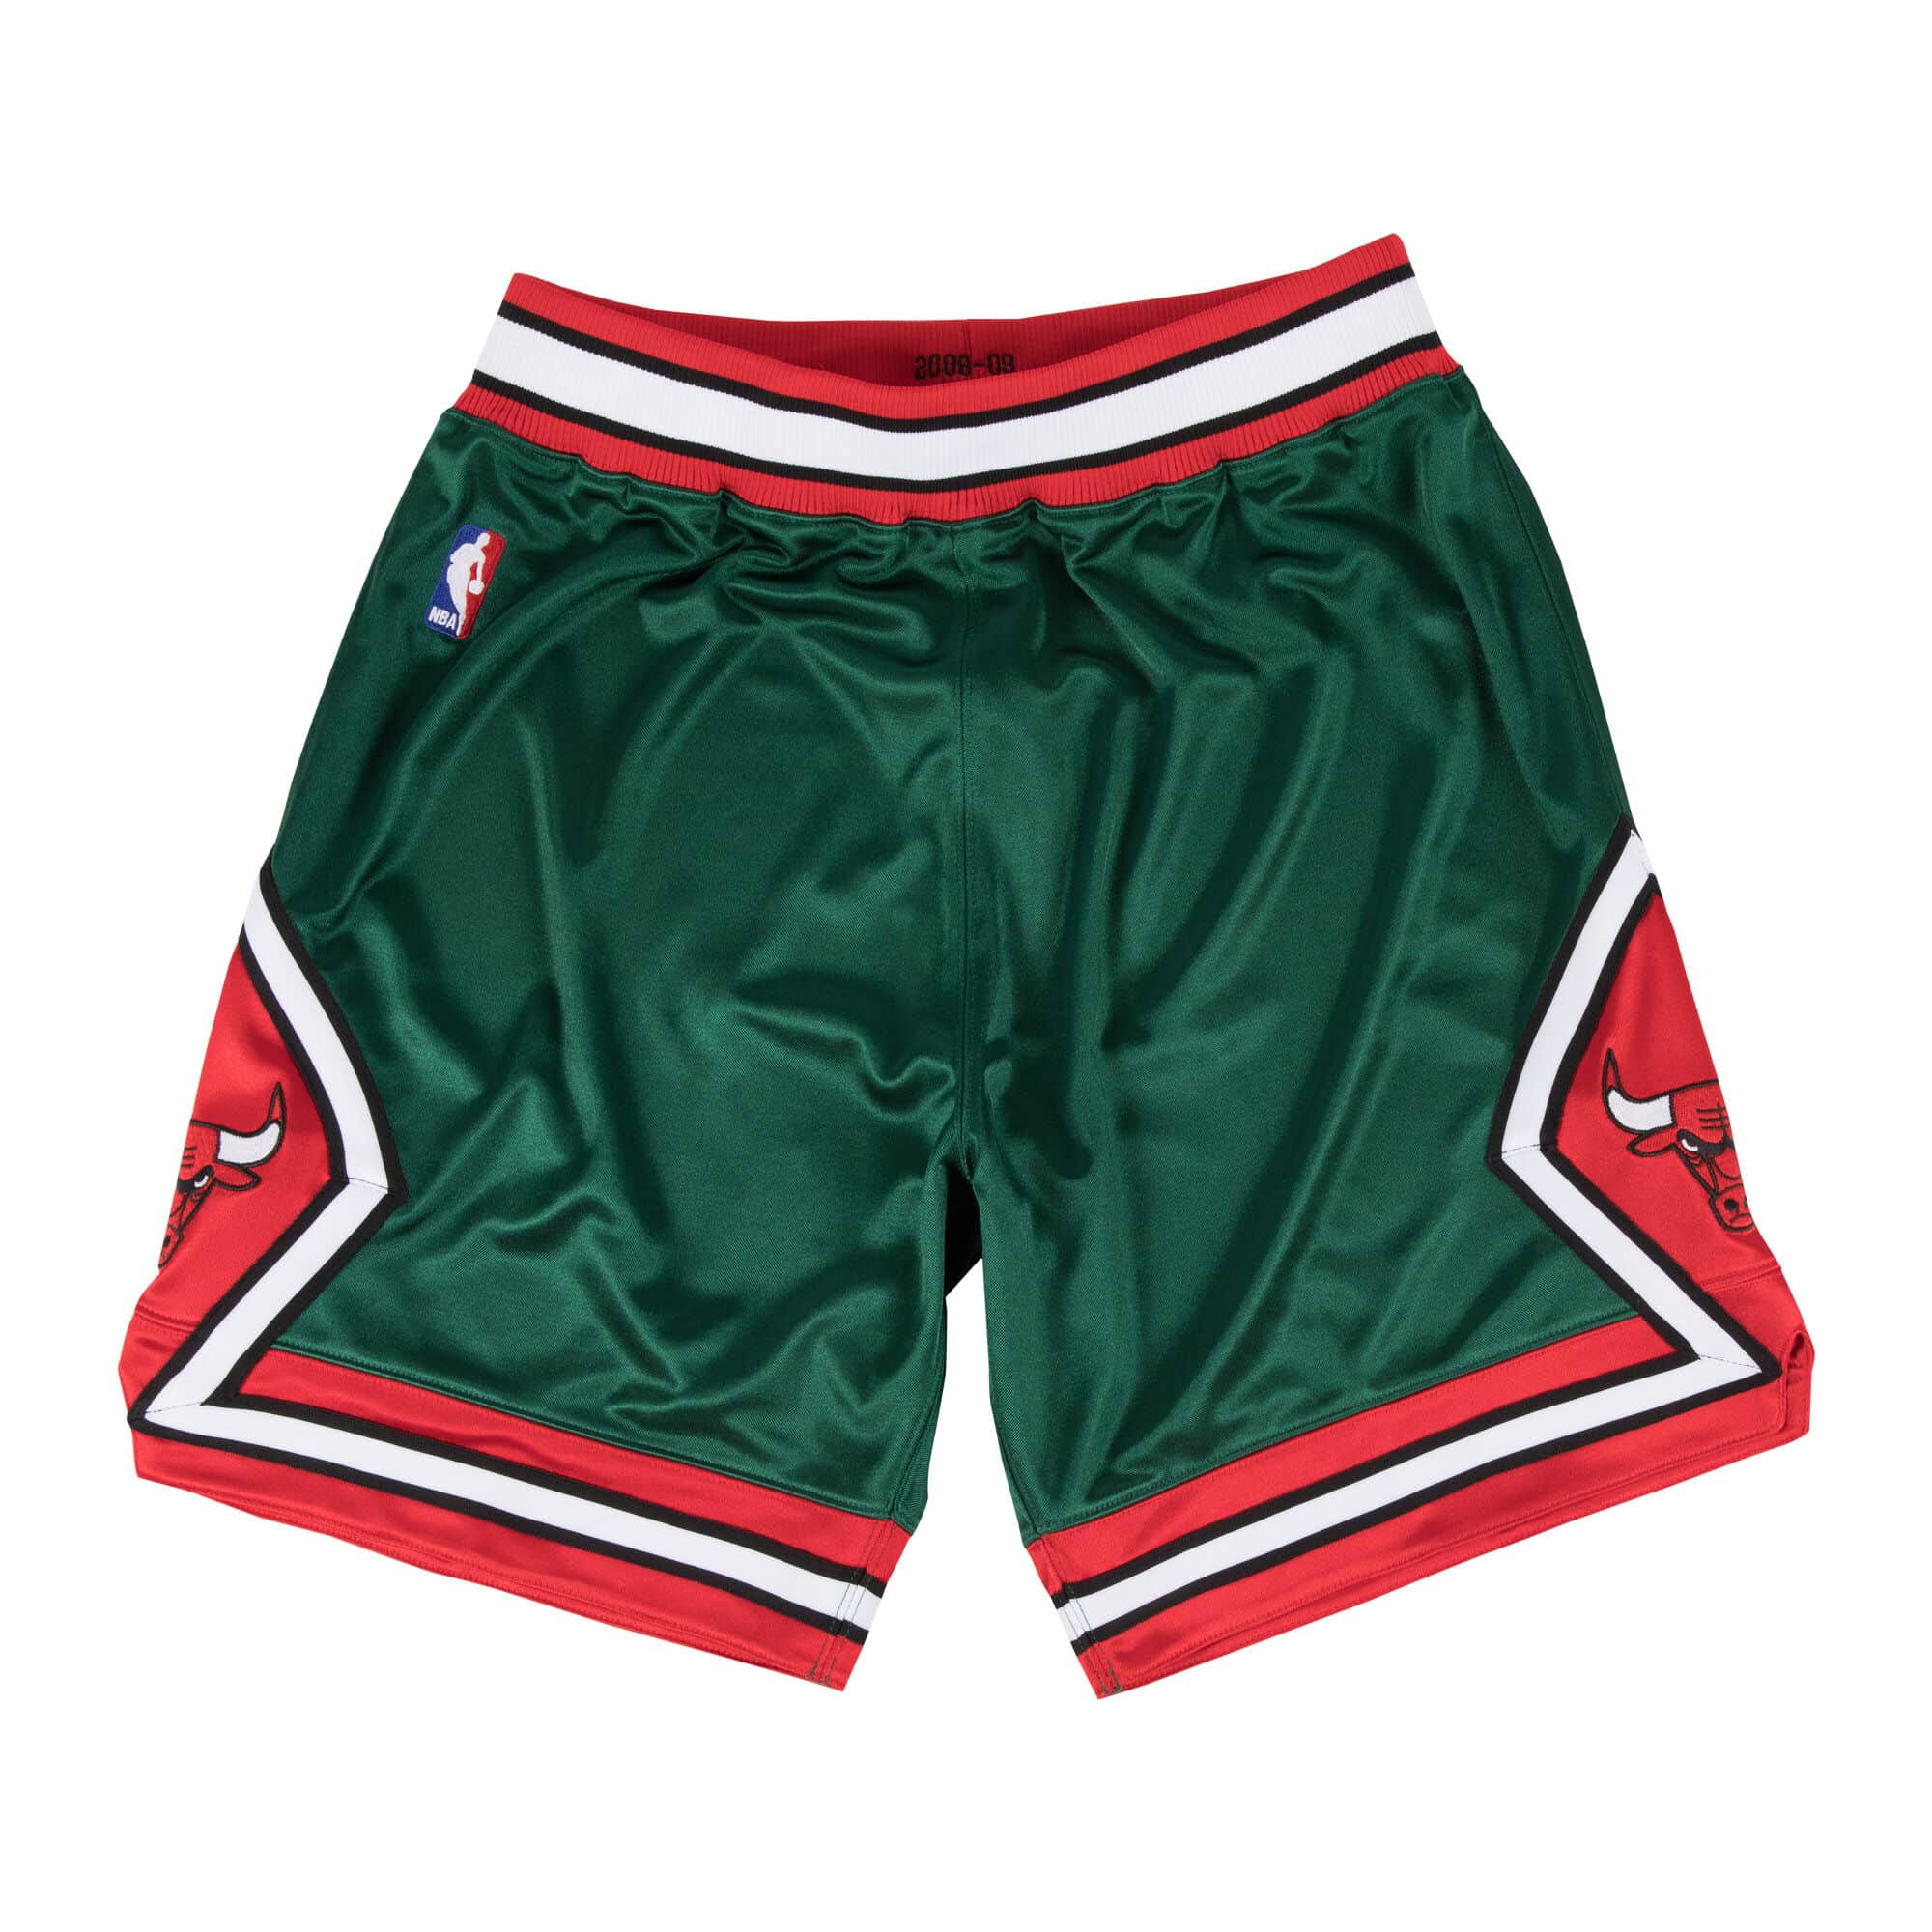 Authentic Shorts Chicago Bulls 1996-97 - Shop Mitchell & Ness